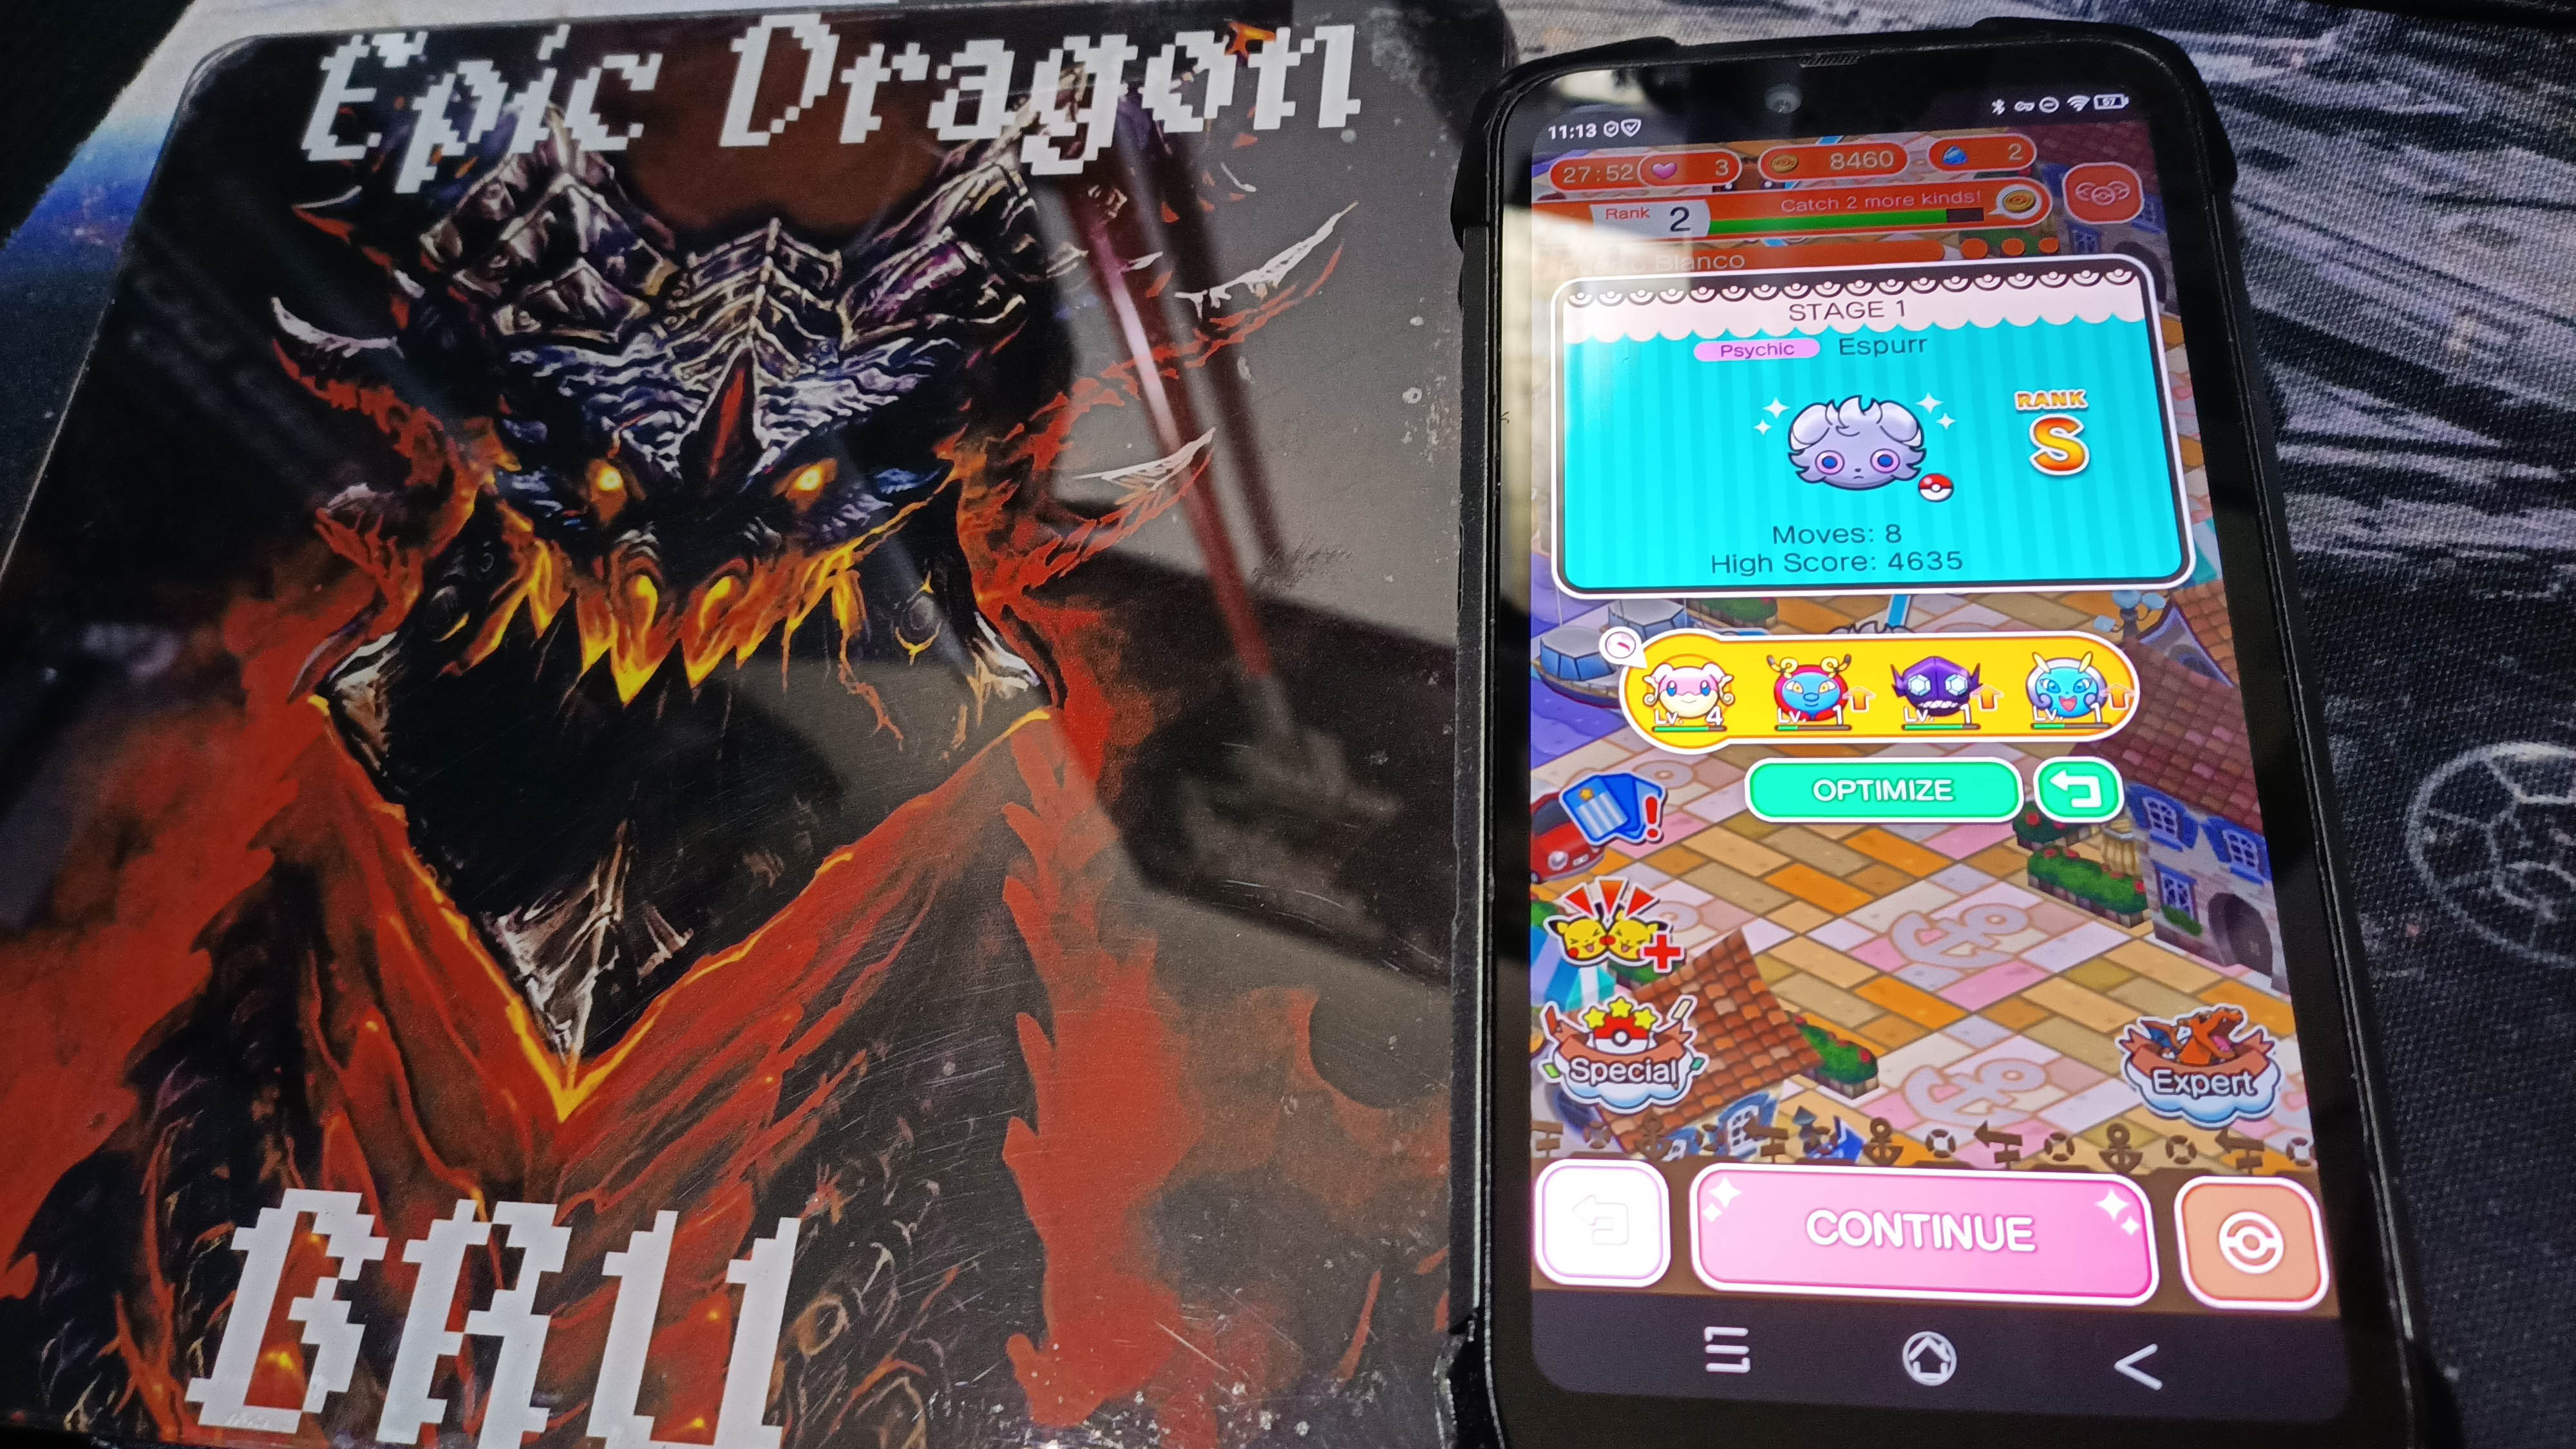 EpicDragon: Pokemon Shuffle Mobile: Stage 001 (Android) 4,635 points on 2022-09-02 17:22:30